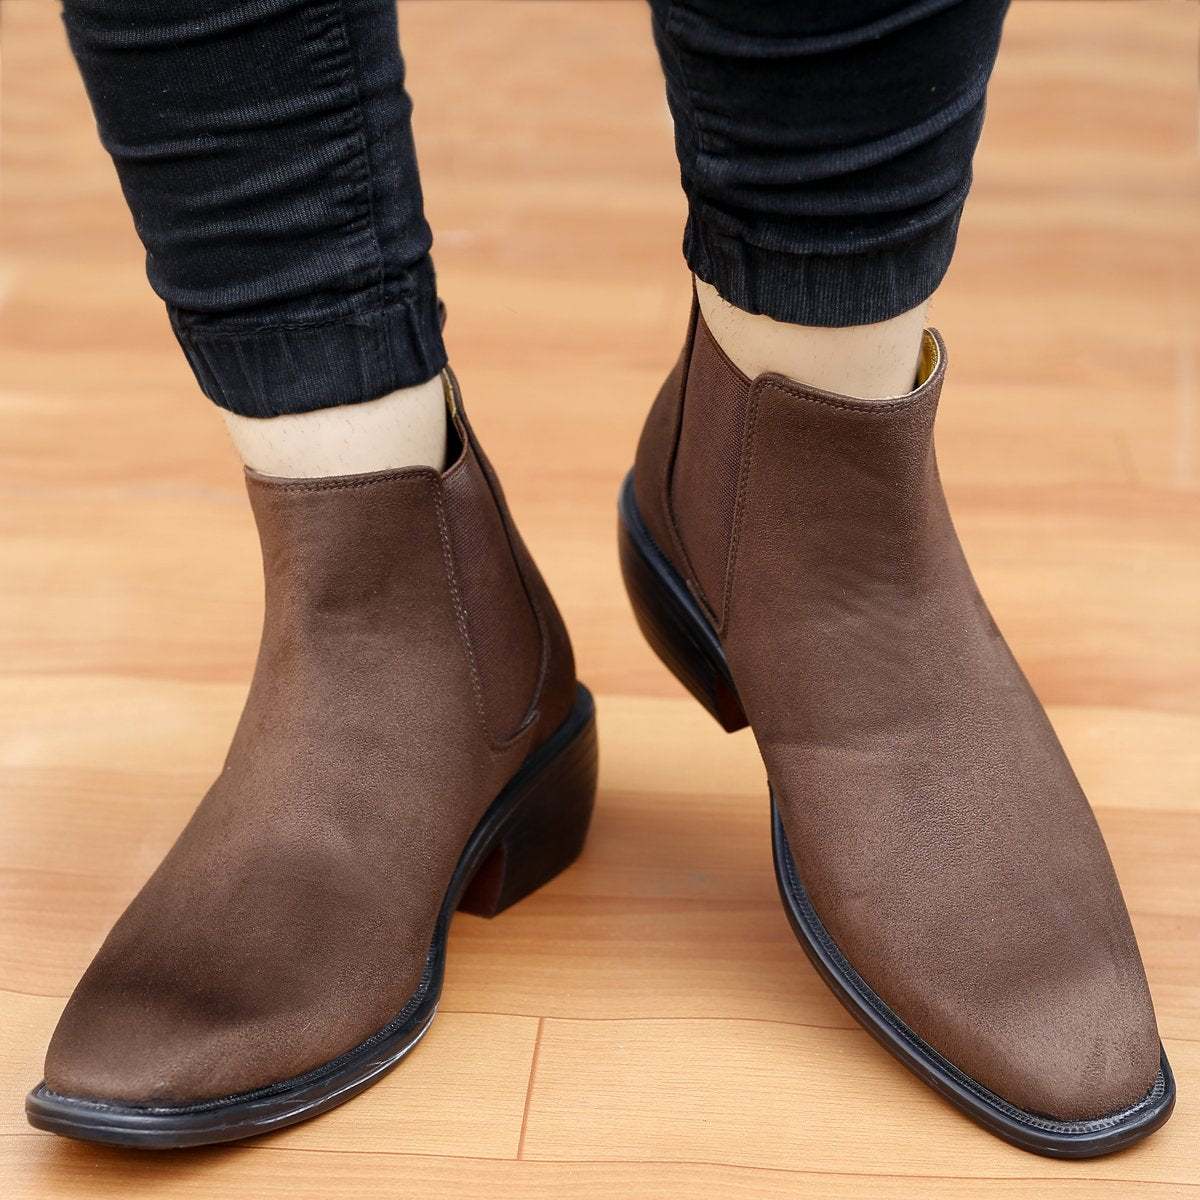 Buy New Height Increasing Stylish Suede British Formal and Casual Wear Chelsea Boots-Jackmarc